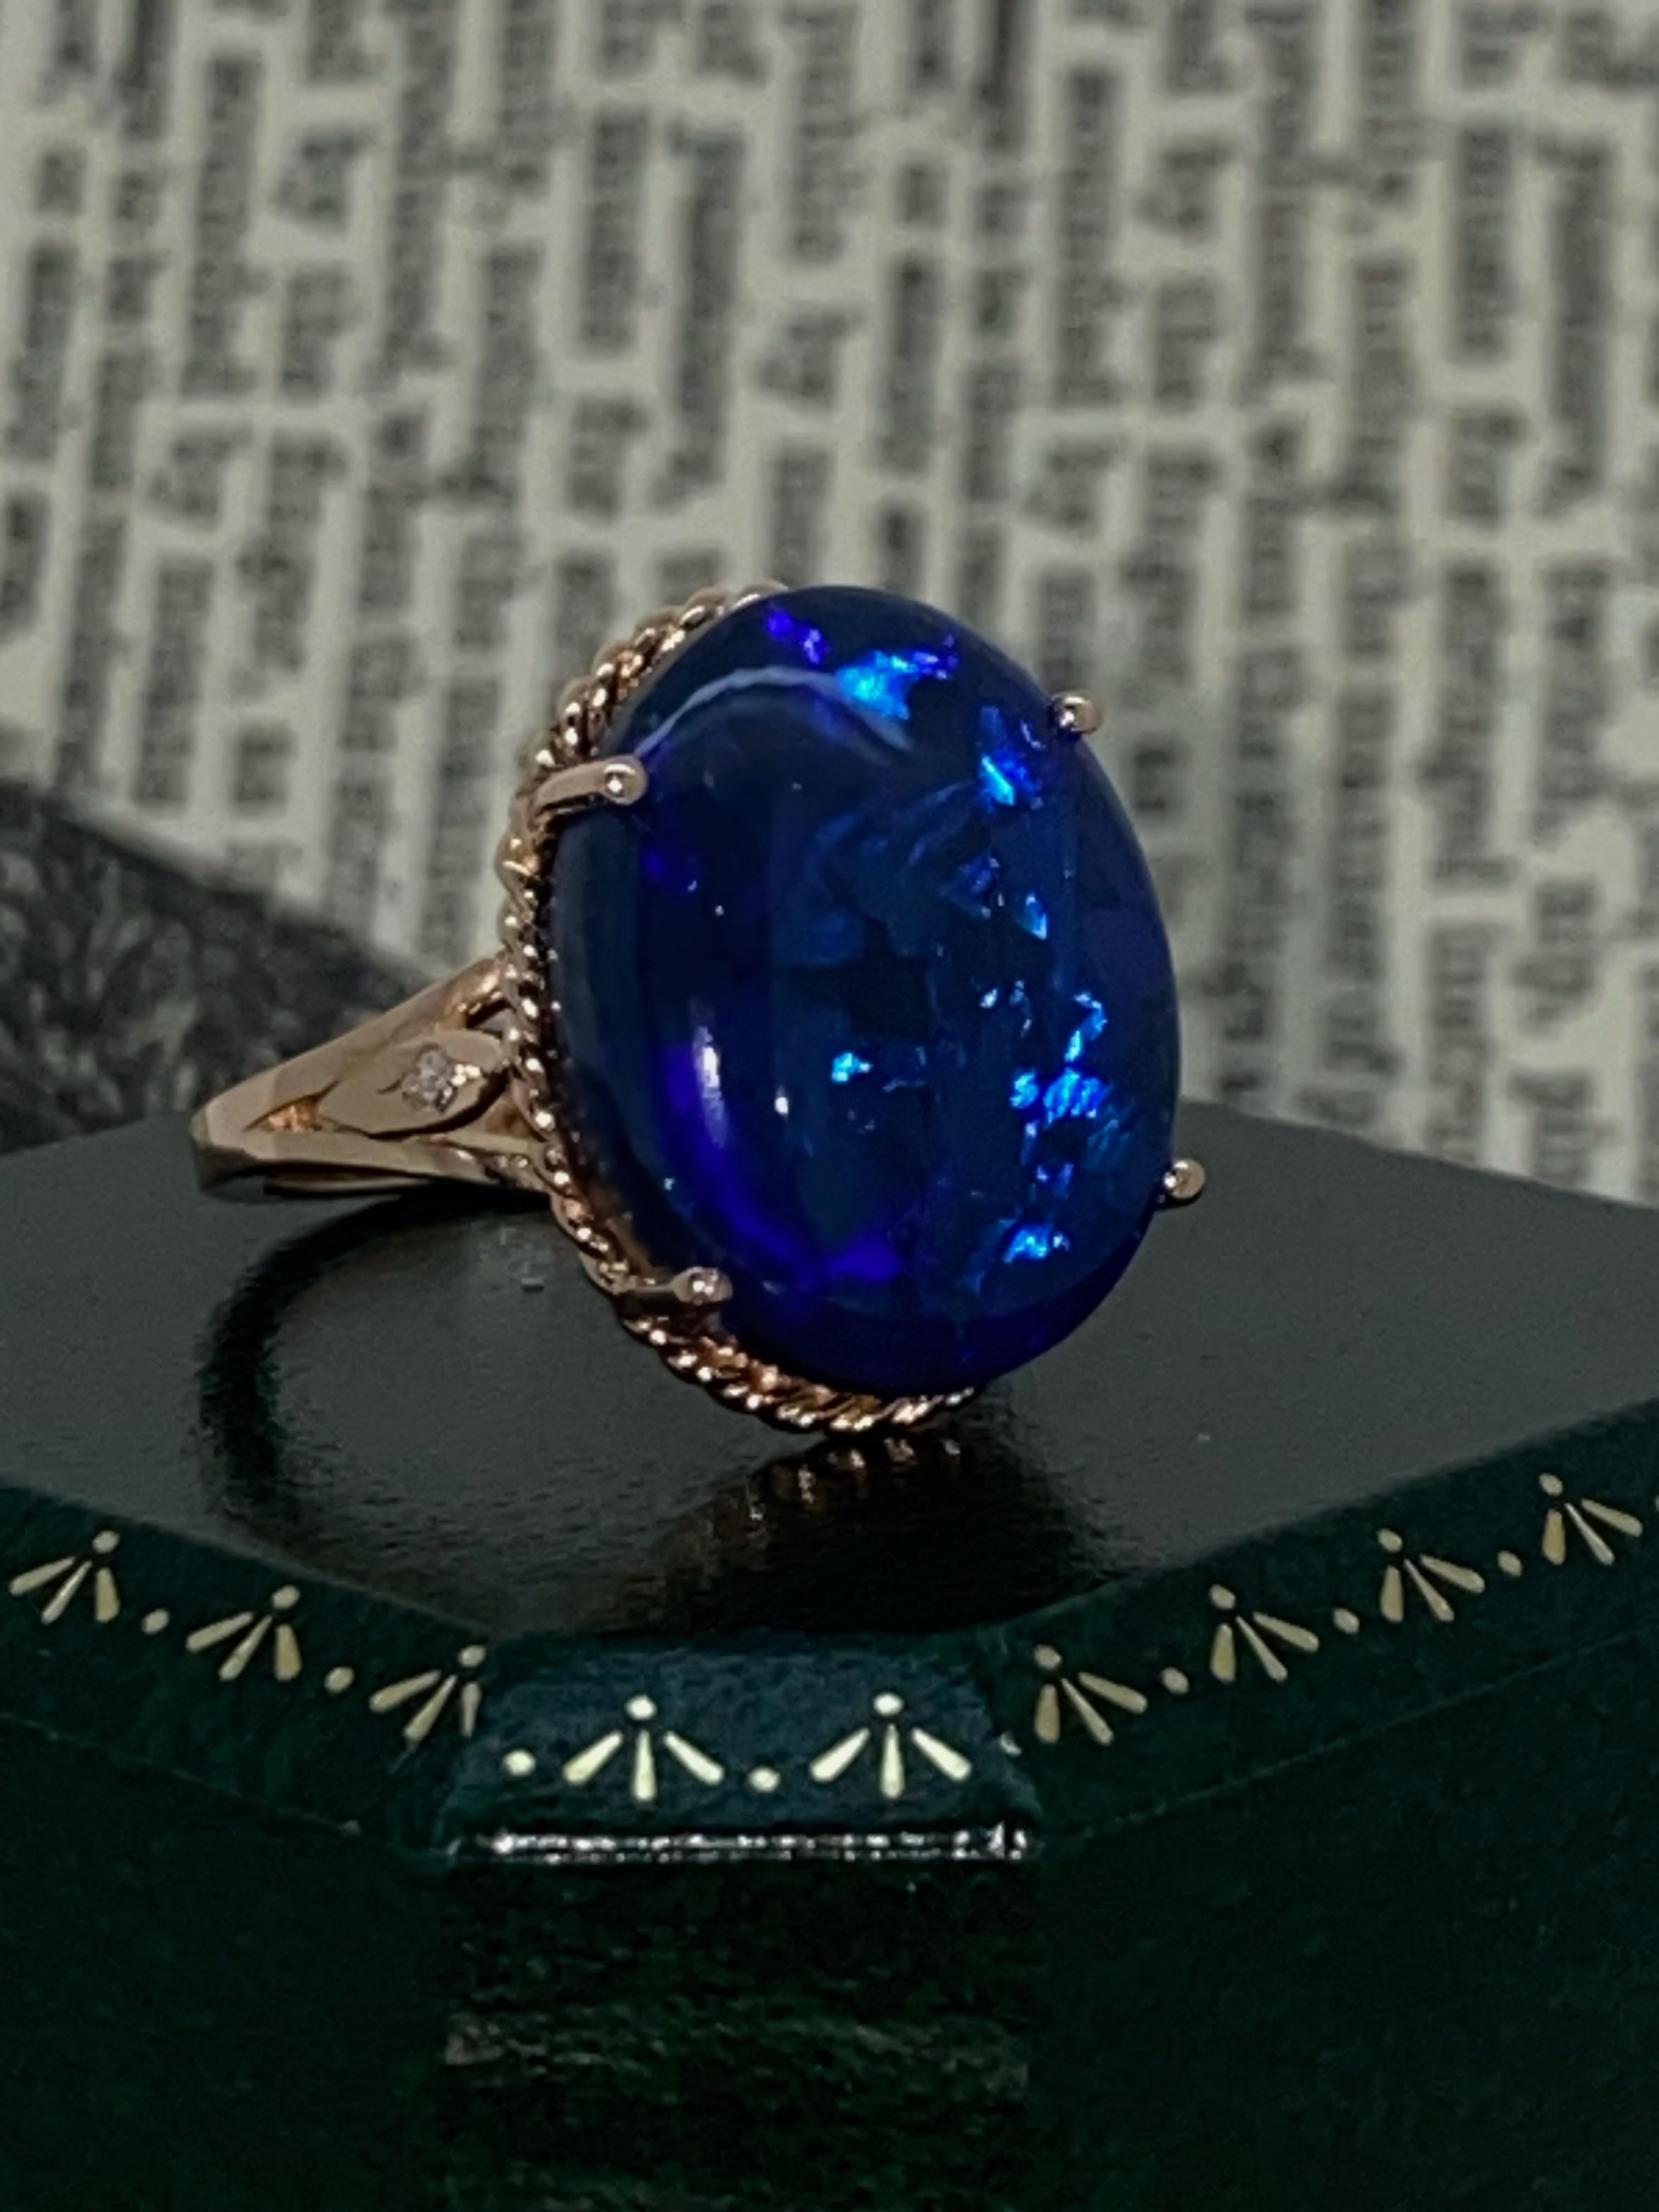 Featuring one of the most desirable gems:
Australian Solid Natural Black Opal 
this piece of jewelry is a head turner & 
very important addition to your collection...

~~~

Performed in 18K Rose Gold, 
this cocktail ring is set with a Black Opal 
of